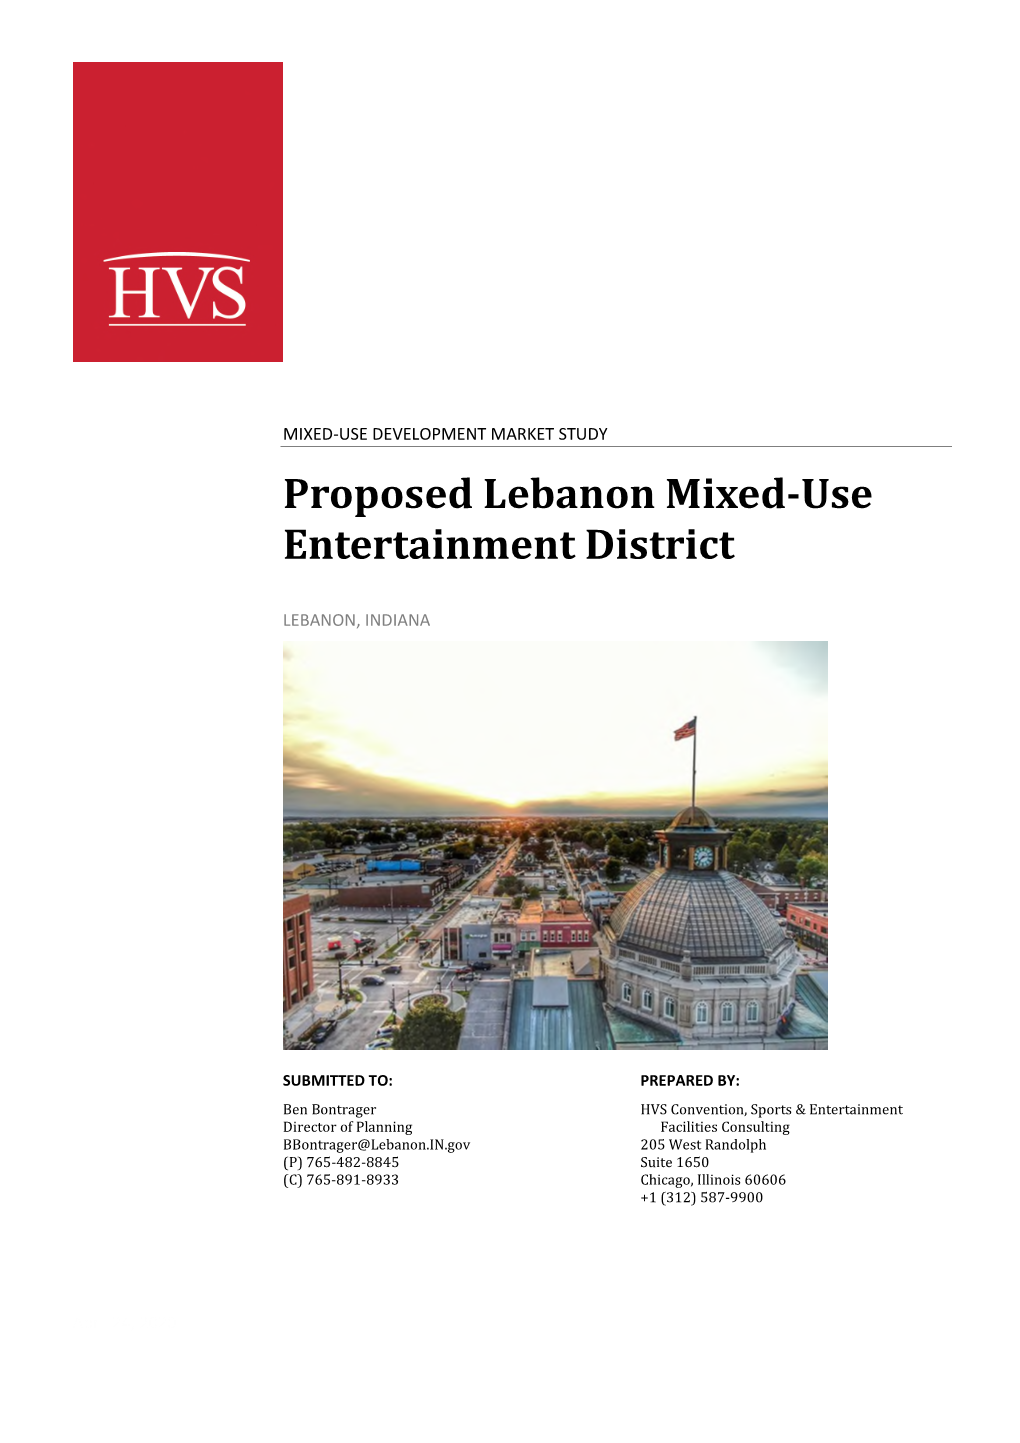 Proposed Lebanon Mixed-Use Entertainment District